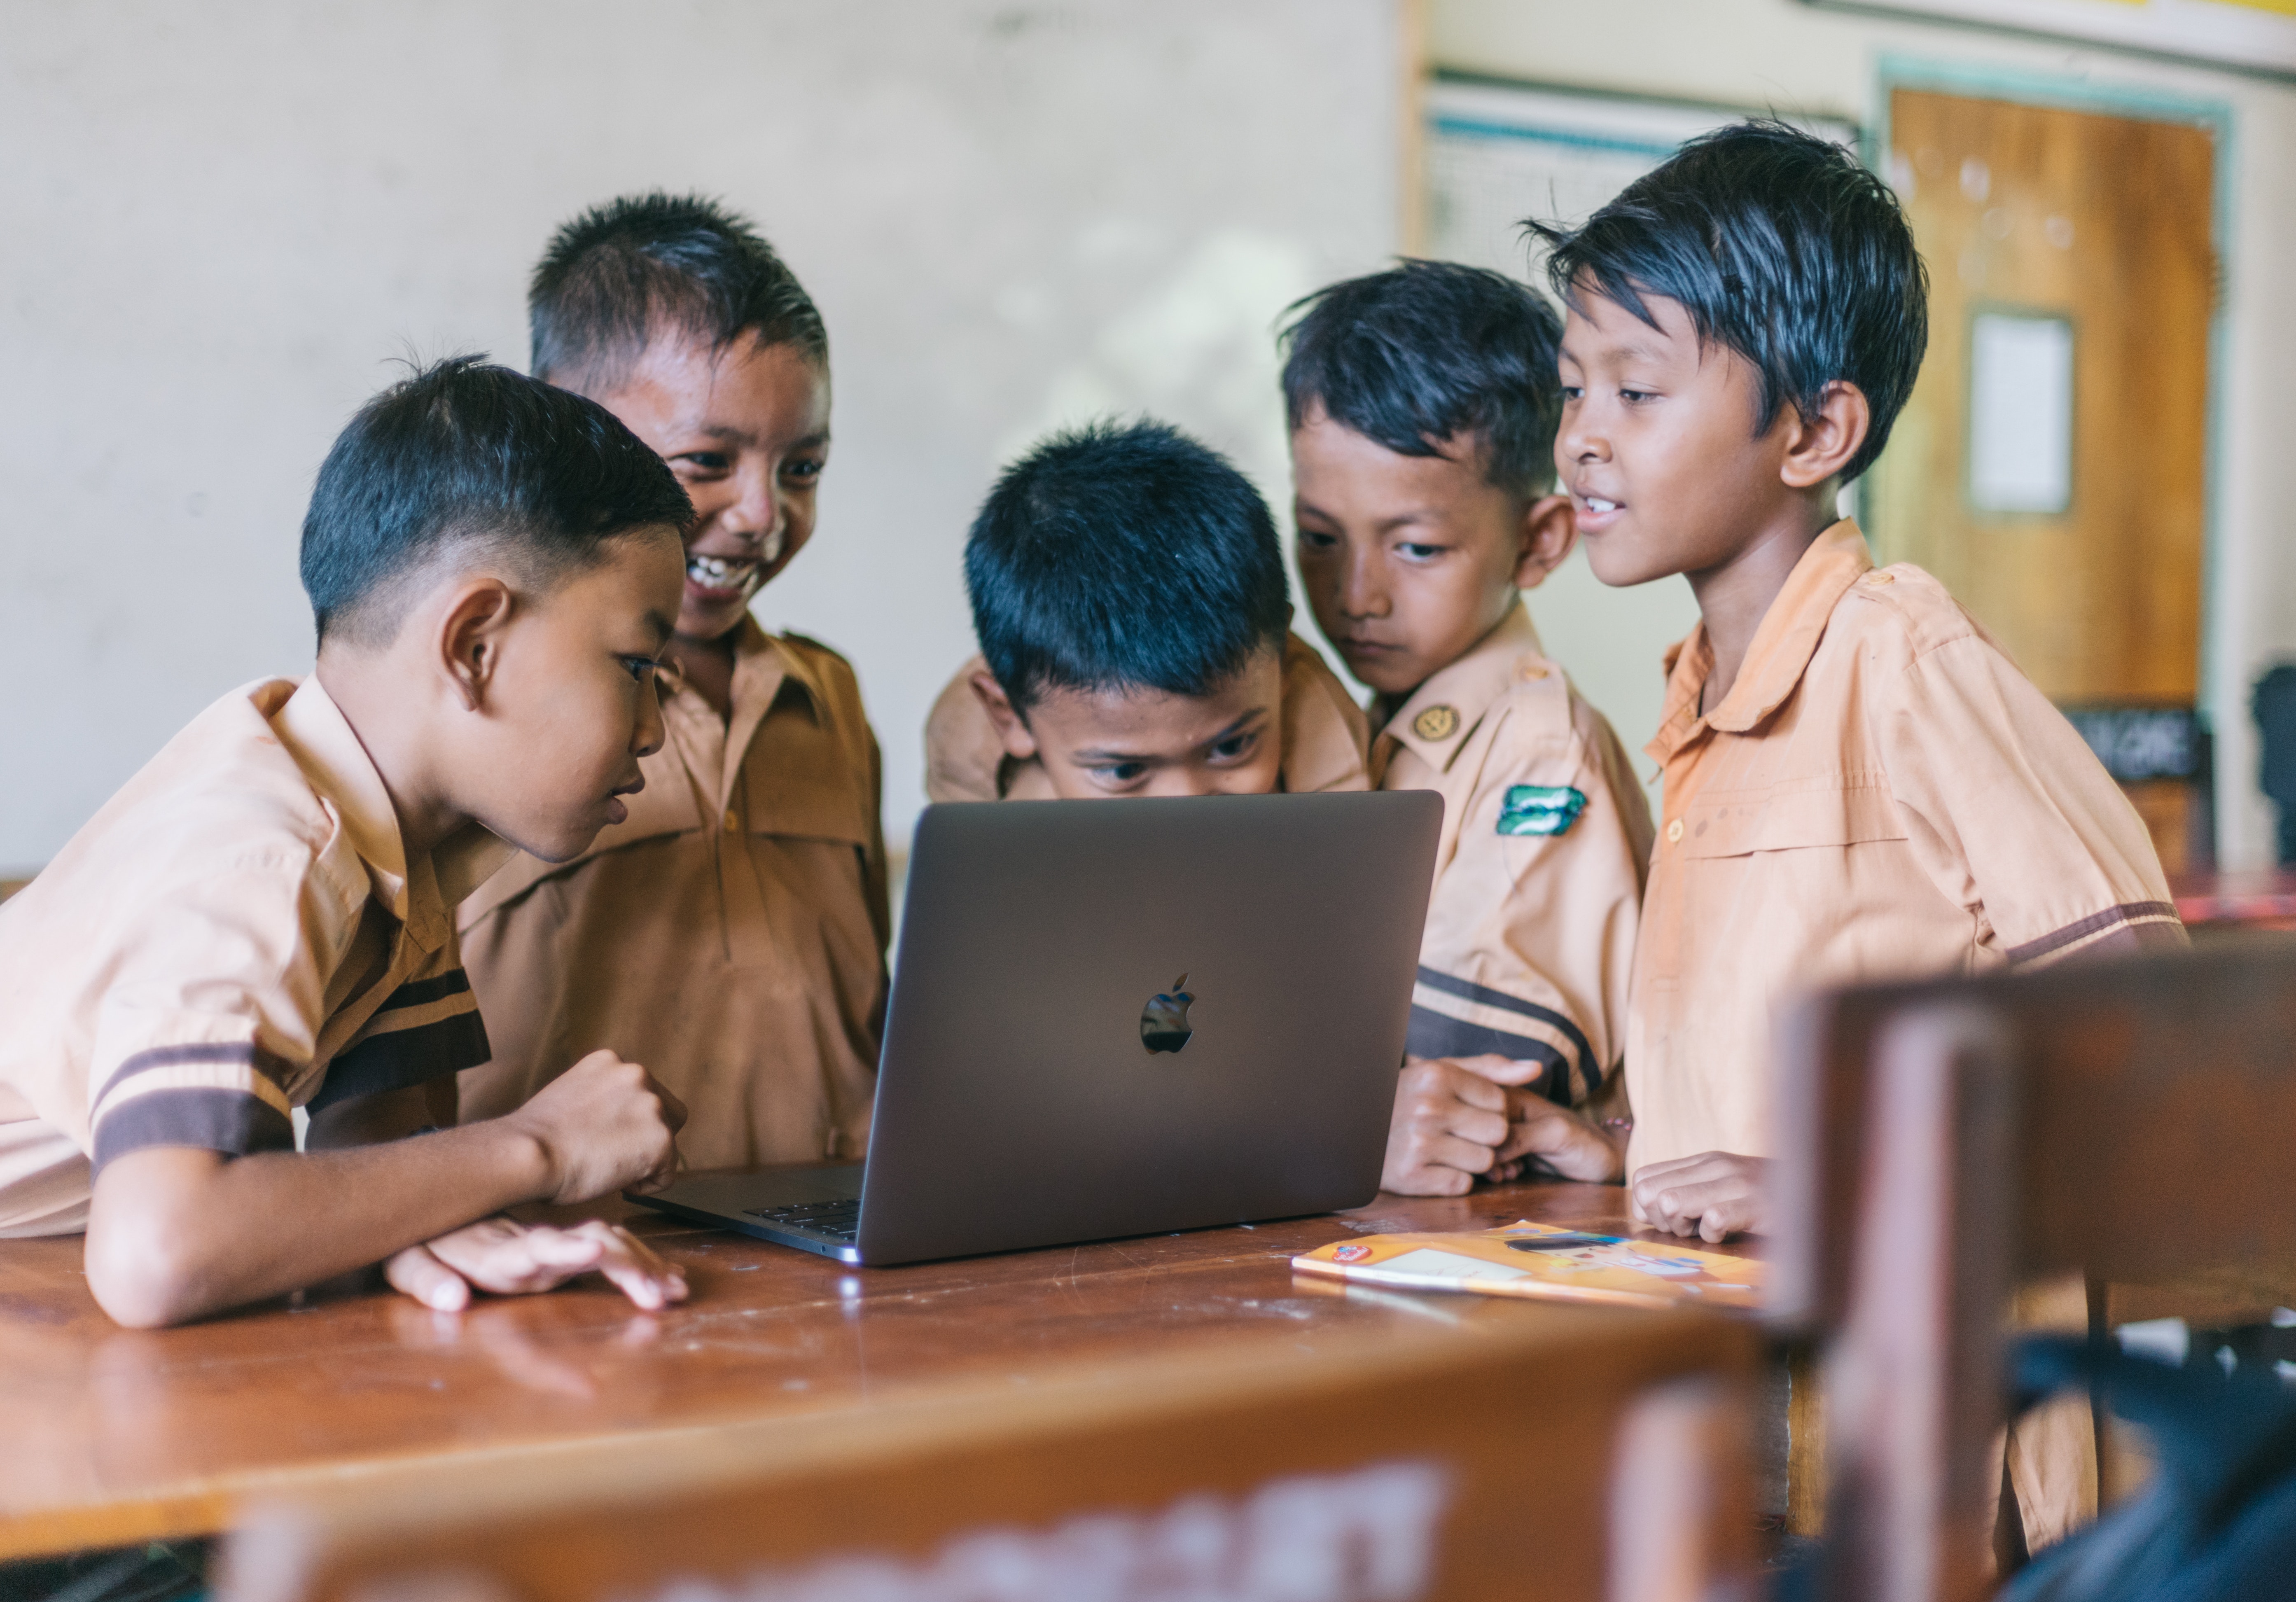 5 refugee schoolboys are curiously looking at a laptop on the desk